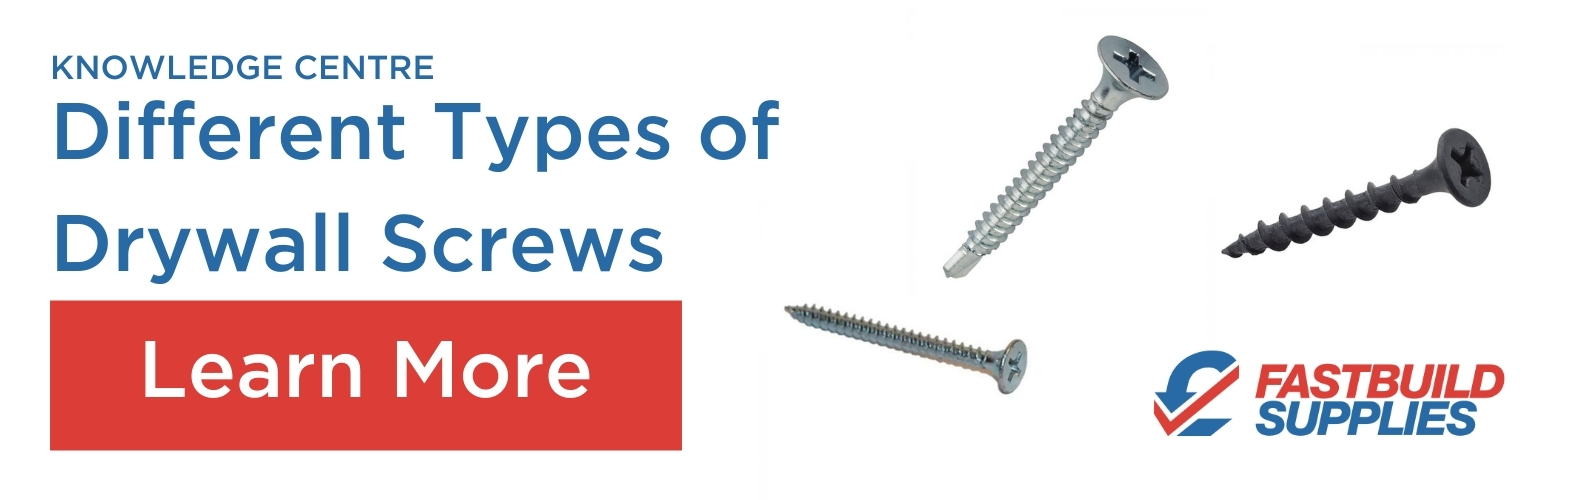 Find out more about the different types of drywall screws